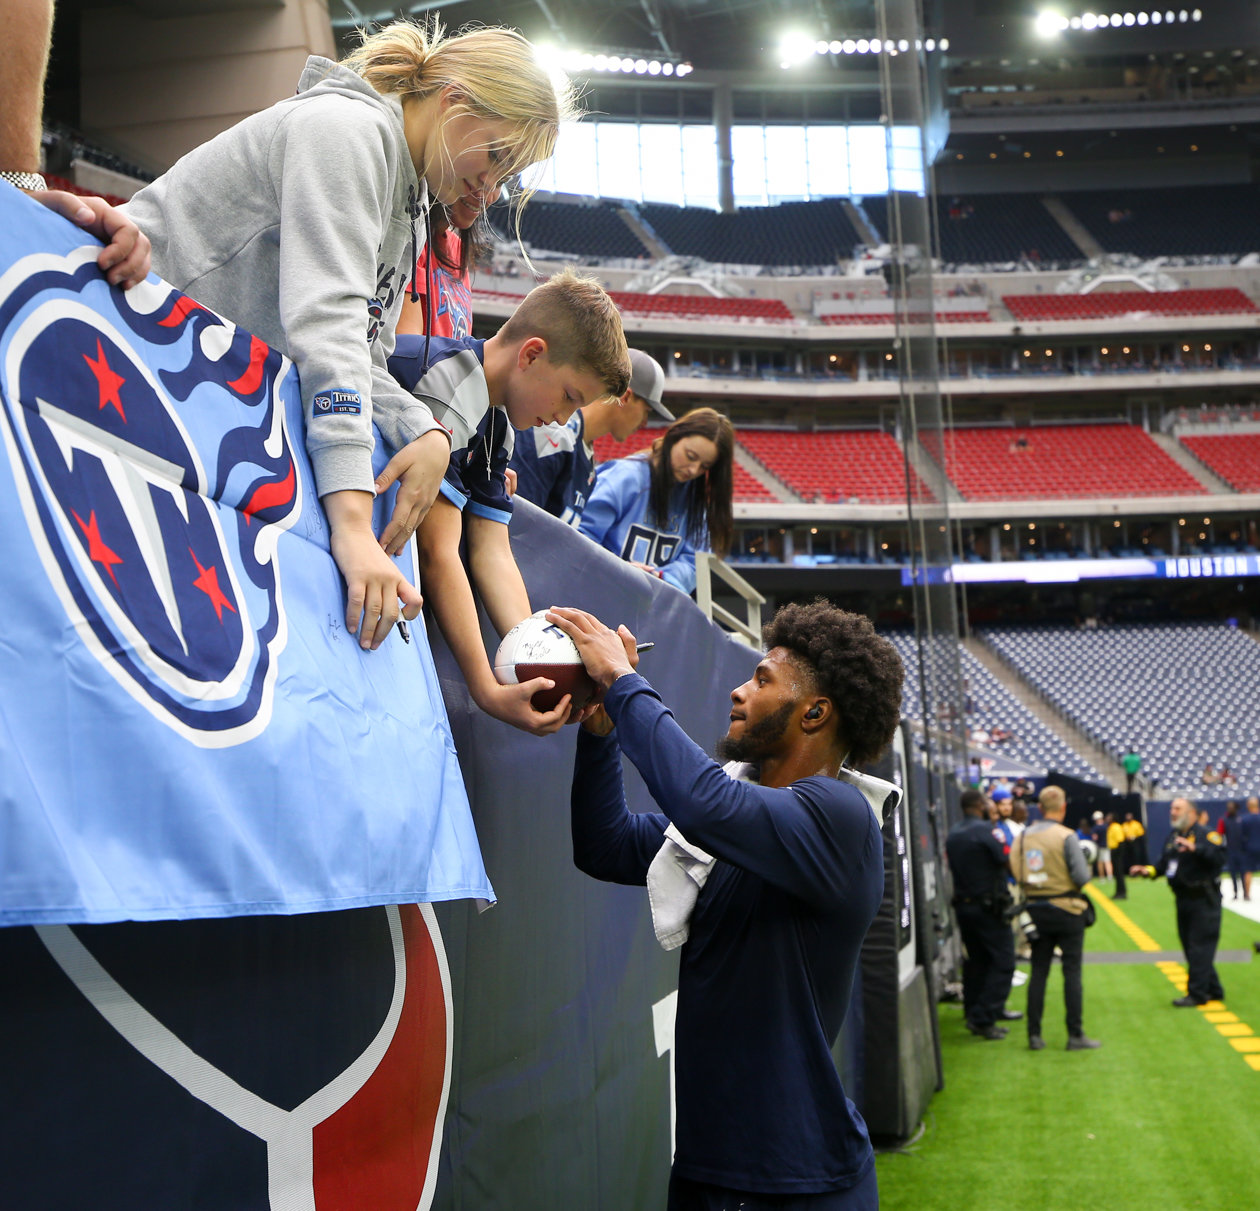 Titans cornerback Kristian Fulton (26) signs autographs before the start of an NFL game between the Texans and the Titans on Oct. 30, 2022 in Houston.